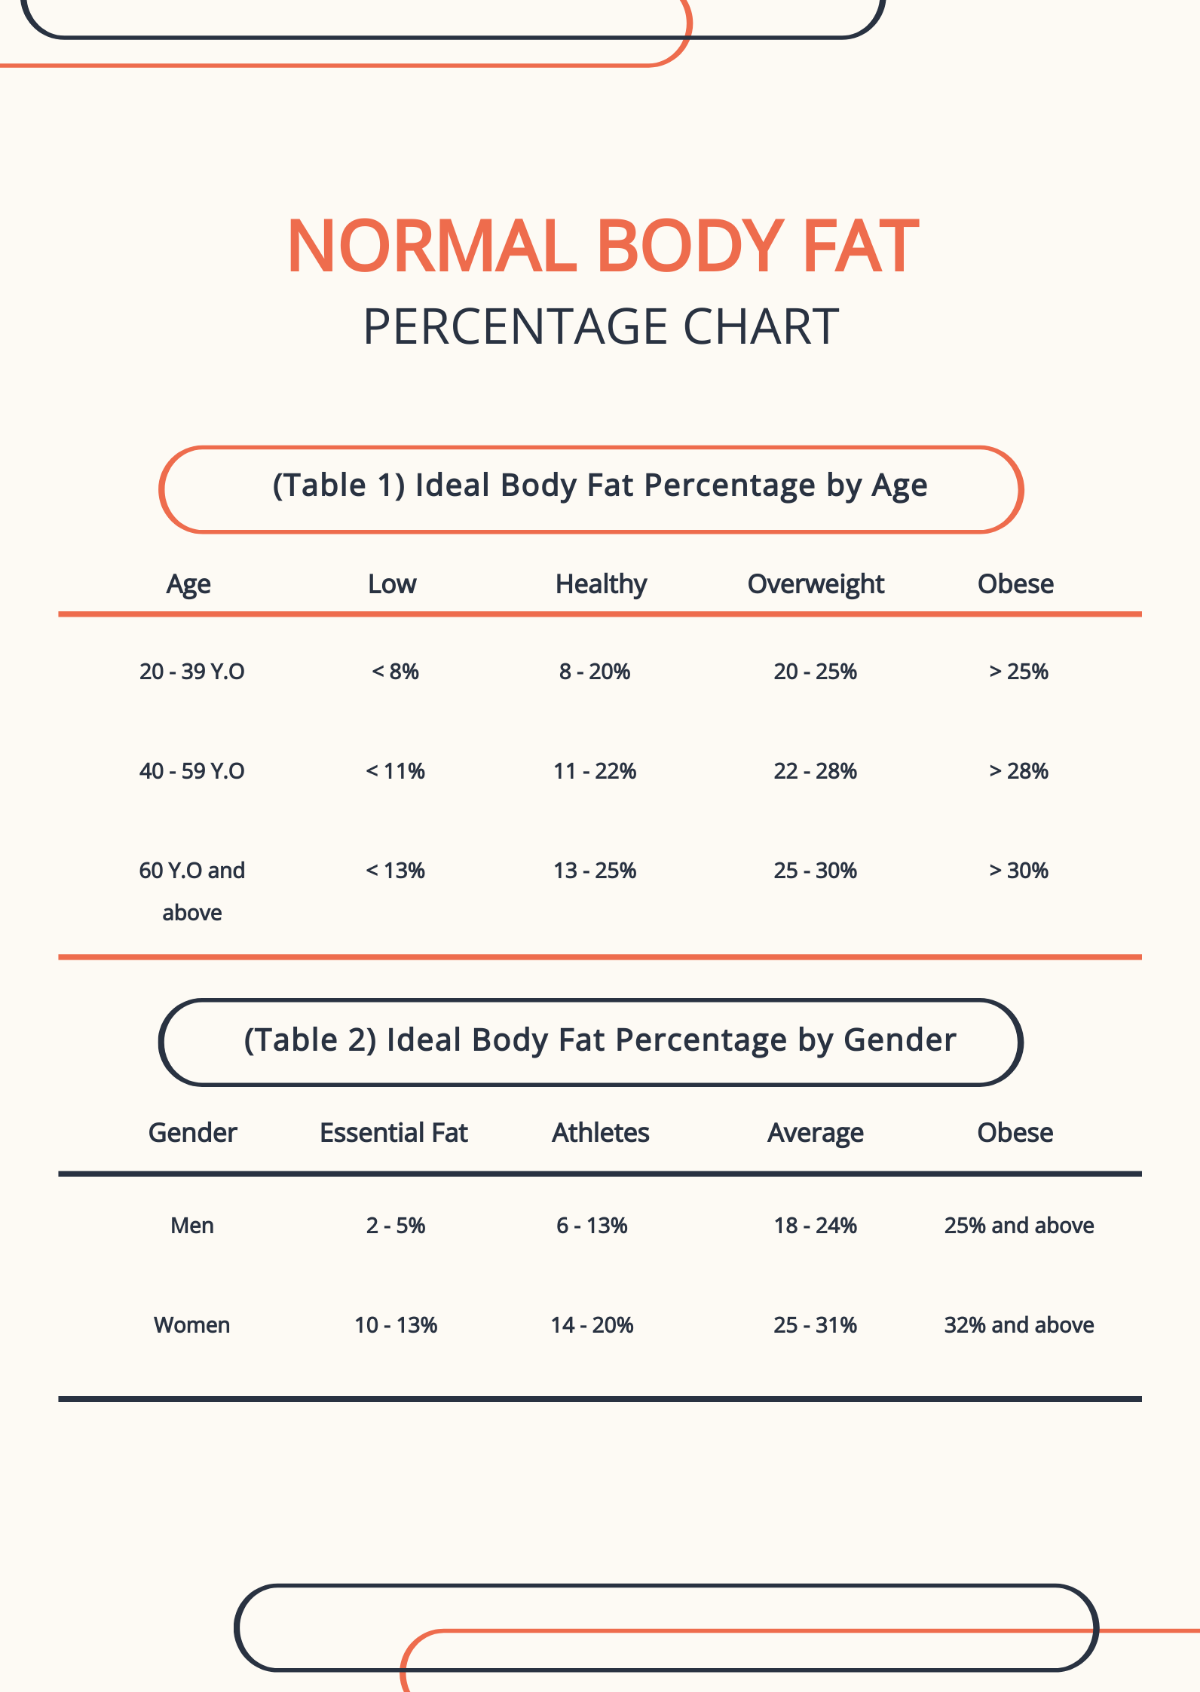 Normal Body Fat Percentage Chart Template - Edit Online & Download ...